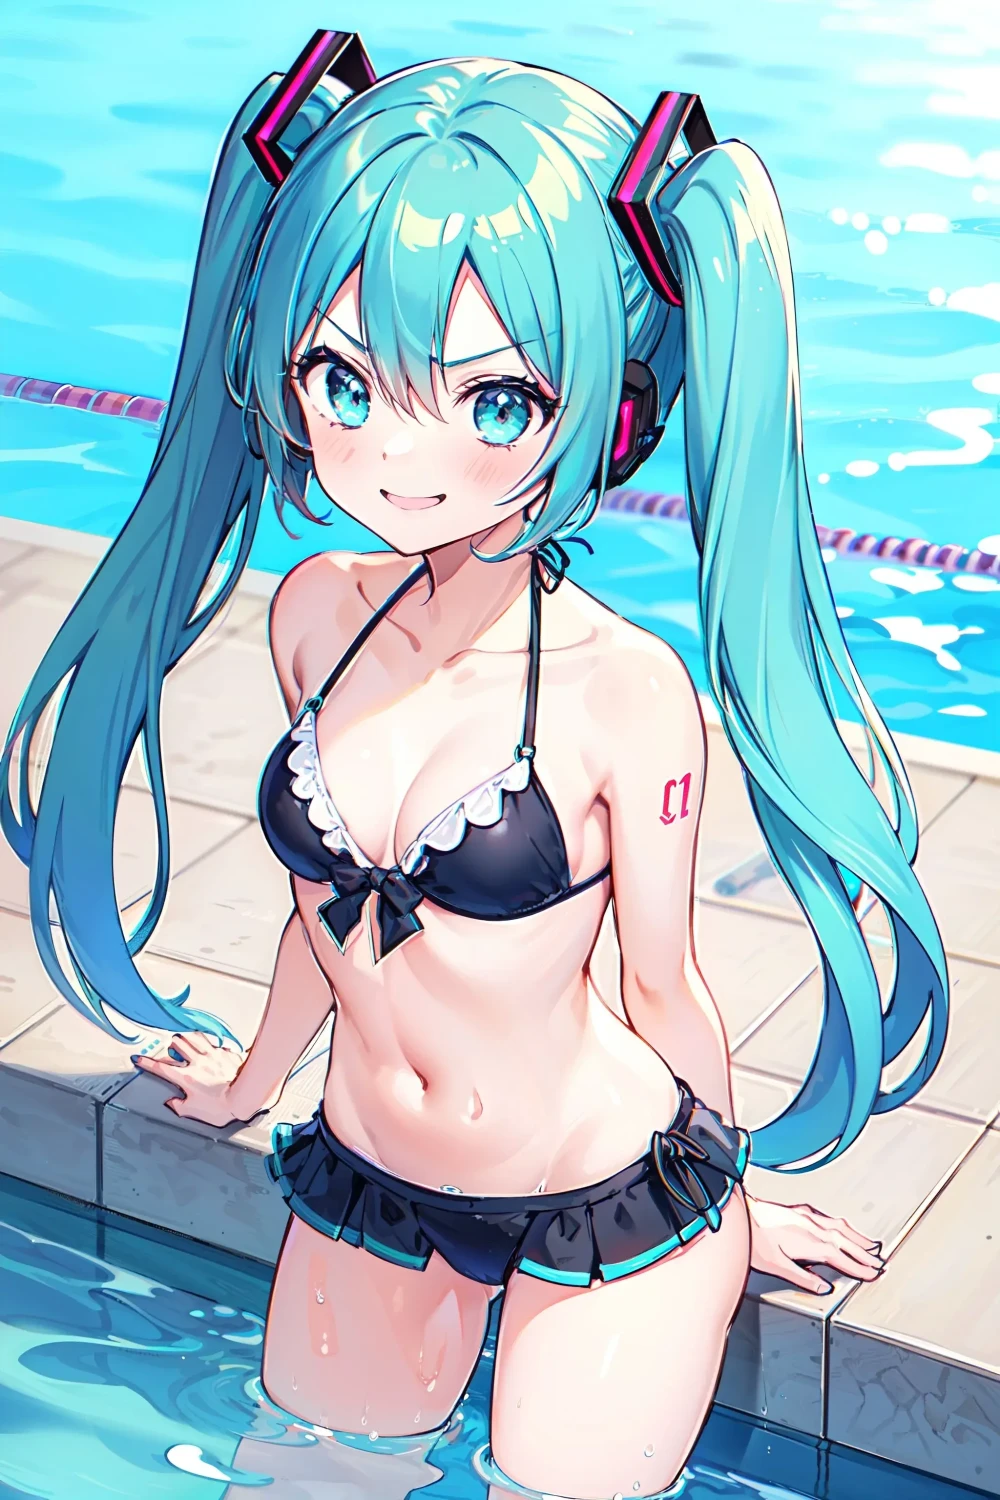 hatsune-miku-anime-style-all-ages-31